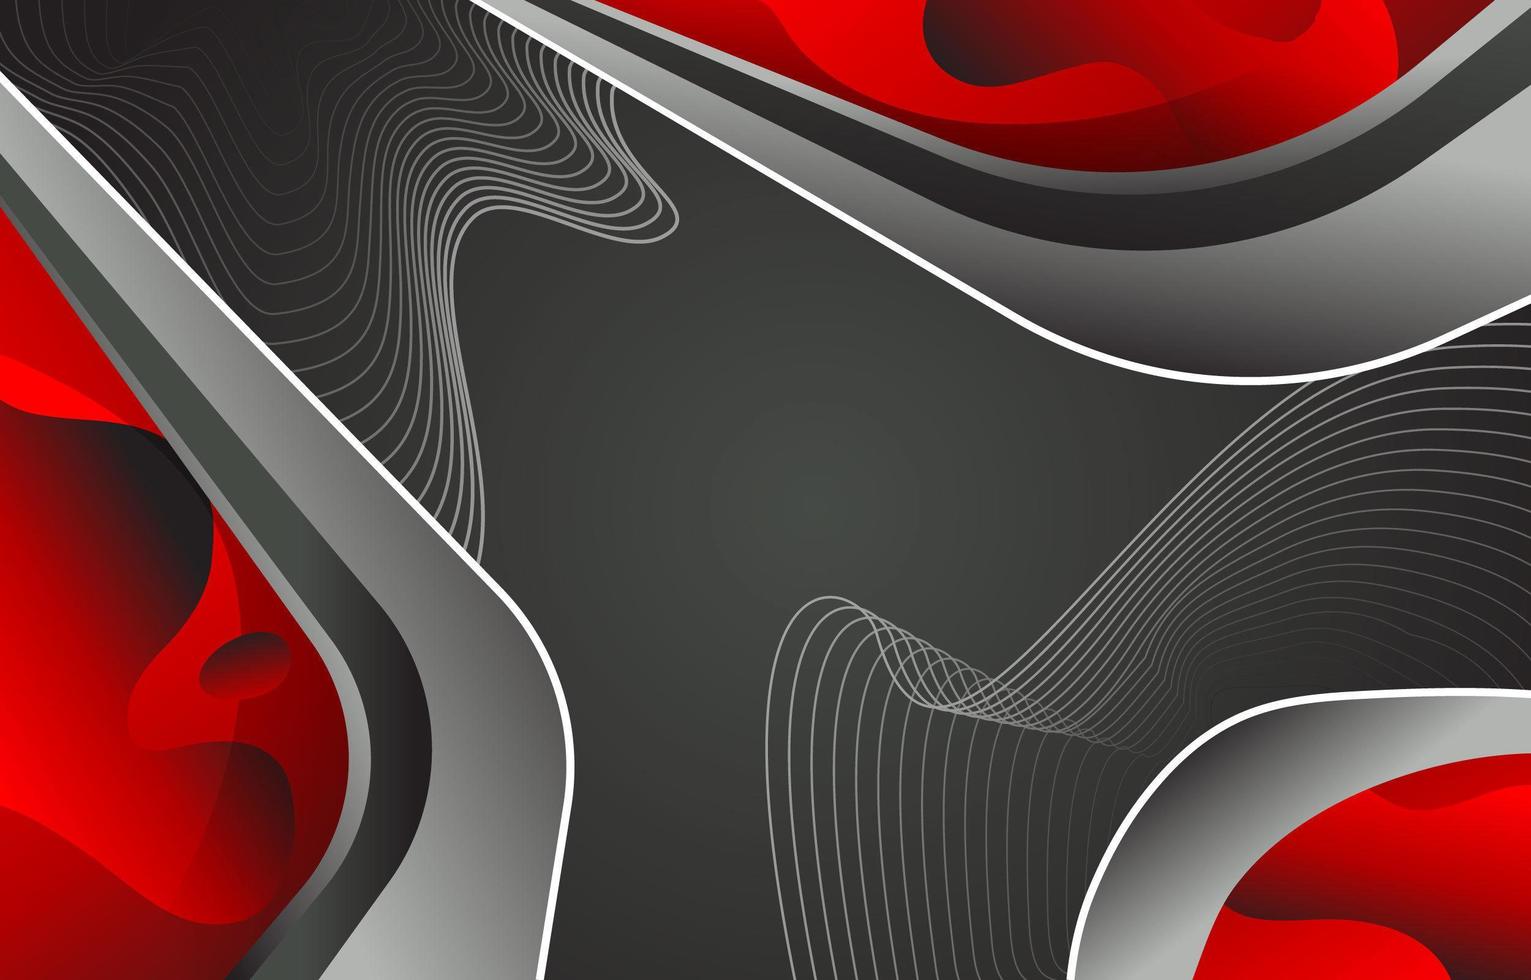 Red and Grey Wave Background vector